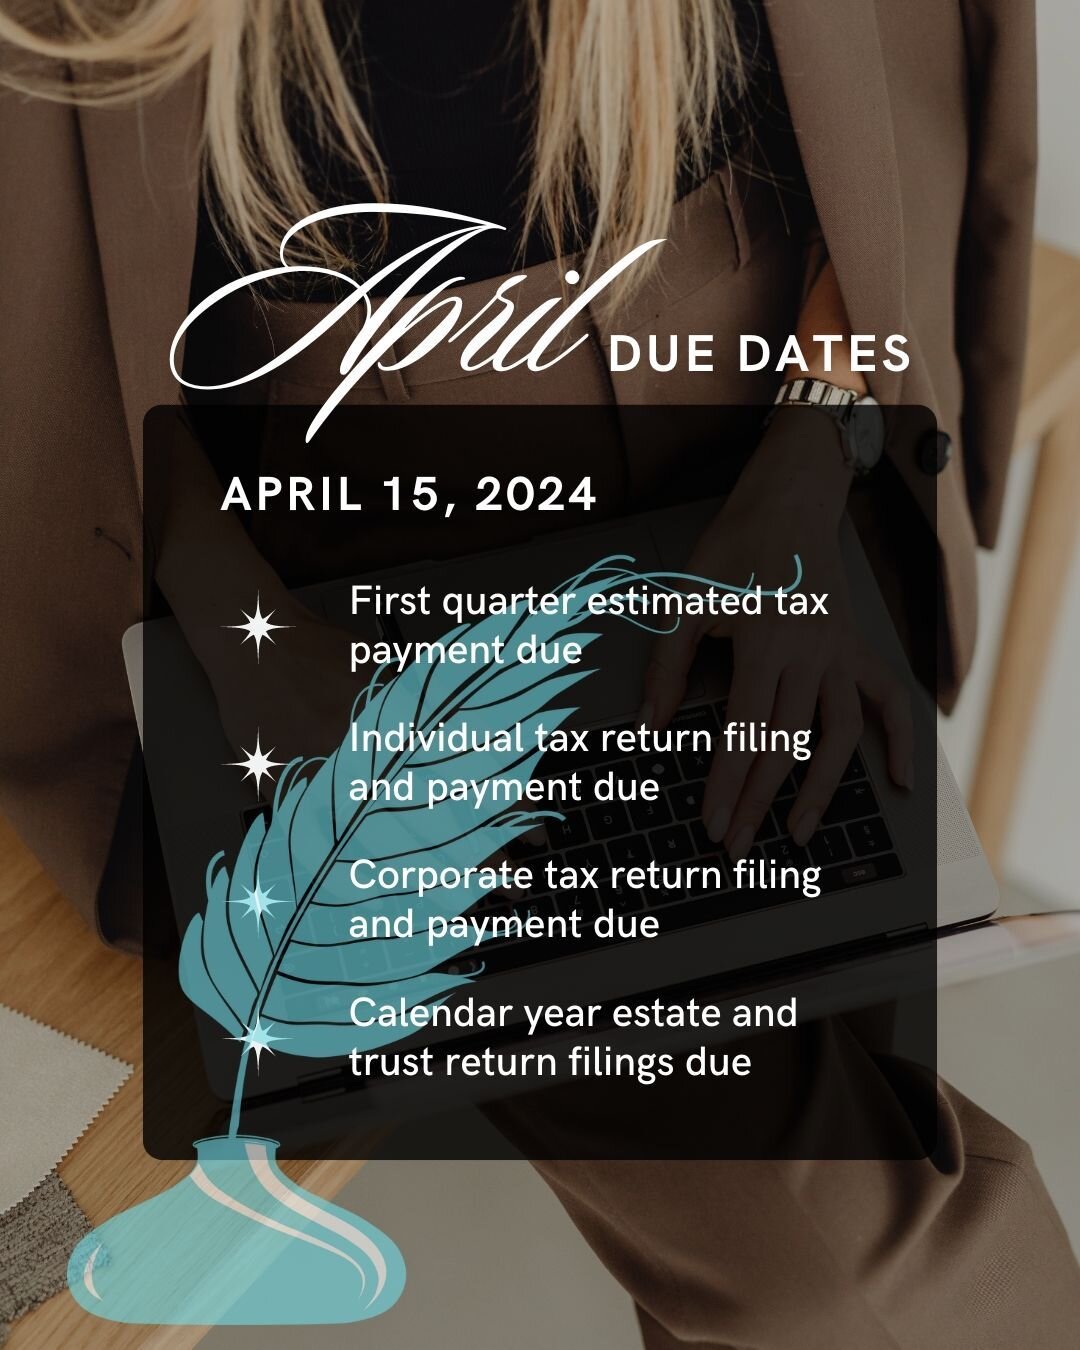 📌 Save this post OR set a calendar reminder for April 15th to:

💸 File your individual tax return (or extend it) and pay any taxes owed 

💸 Pay your first quarter estimated taxes for 2024

💸 File your corporate tax return (or extend it) and pay a